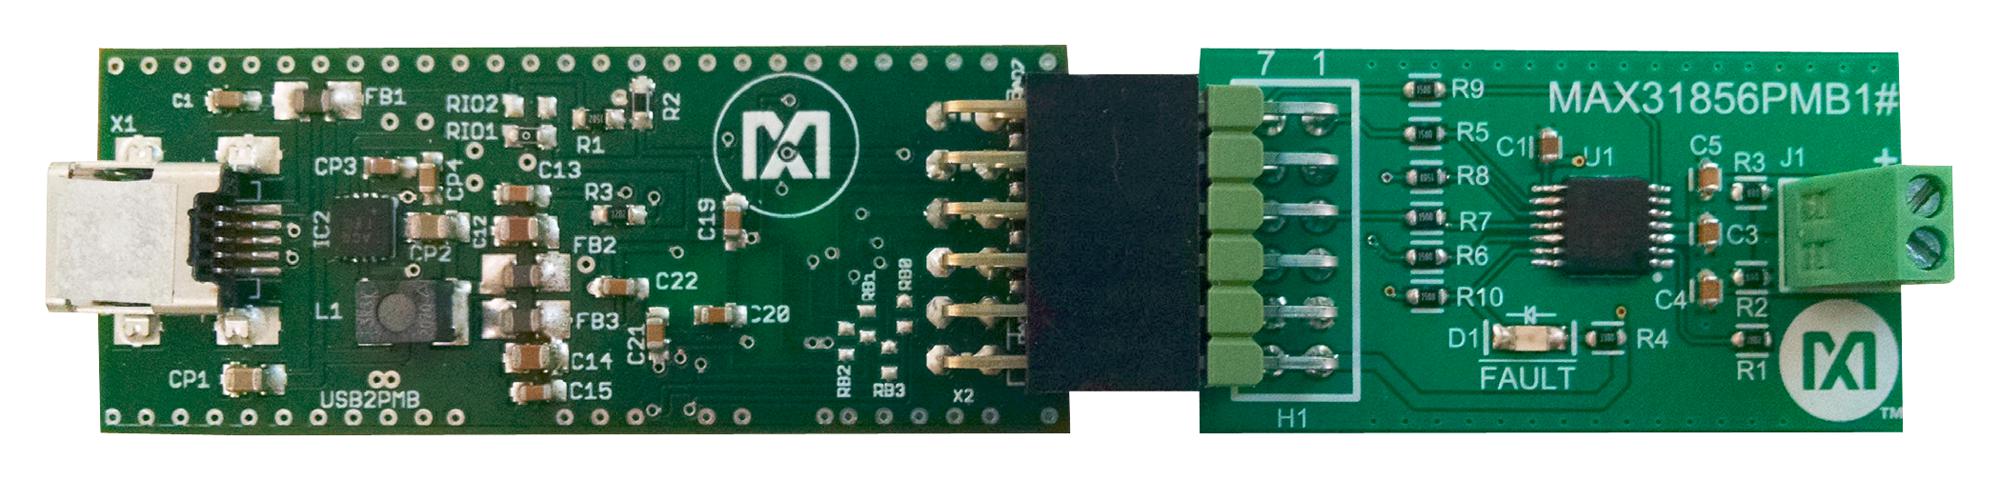 MAX31856PMB1# EVALUATION BOARD, THERMOCOUPLE-DIGITAL MAXIM INTEGRATED / ANALOG DEVICES